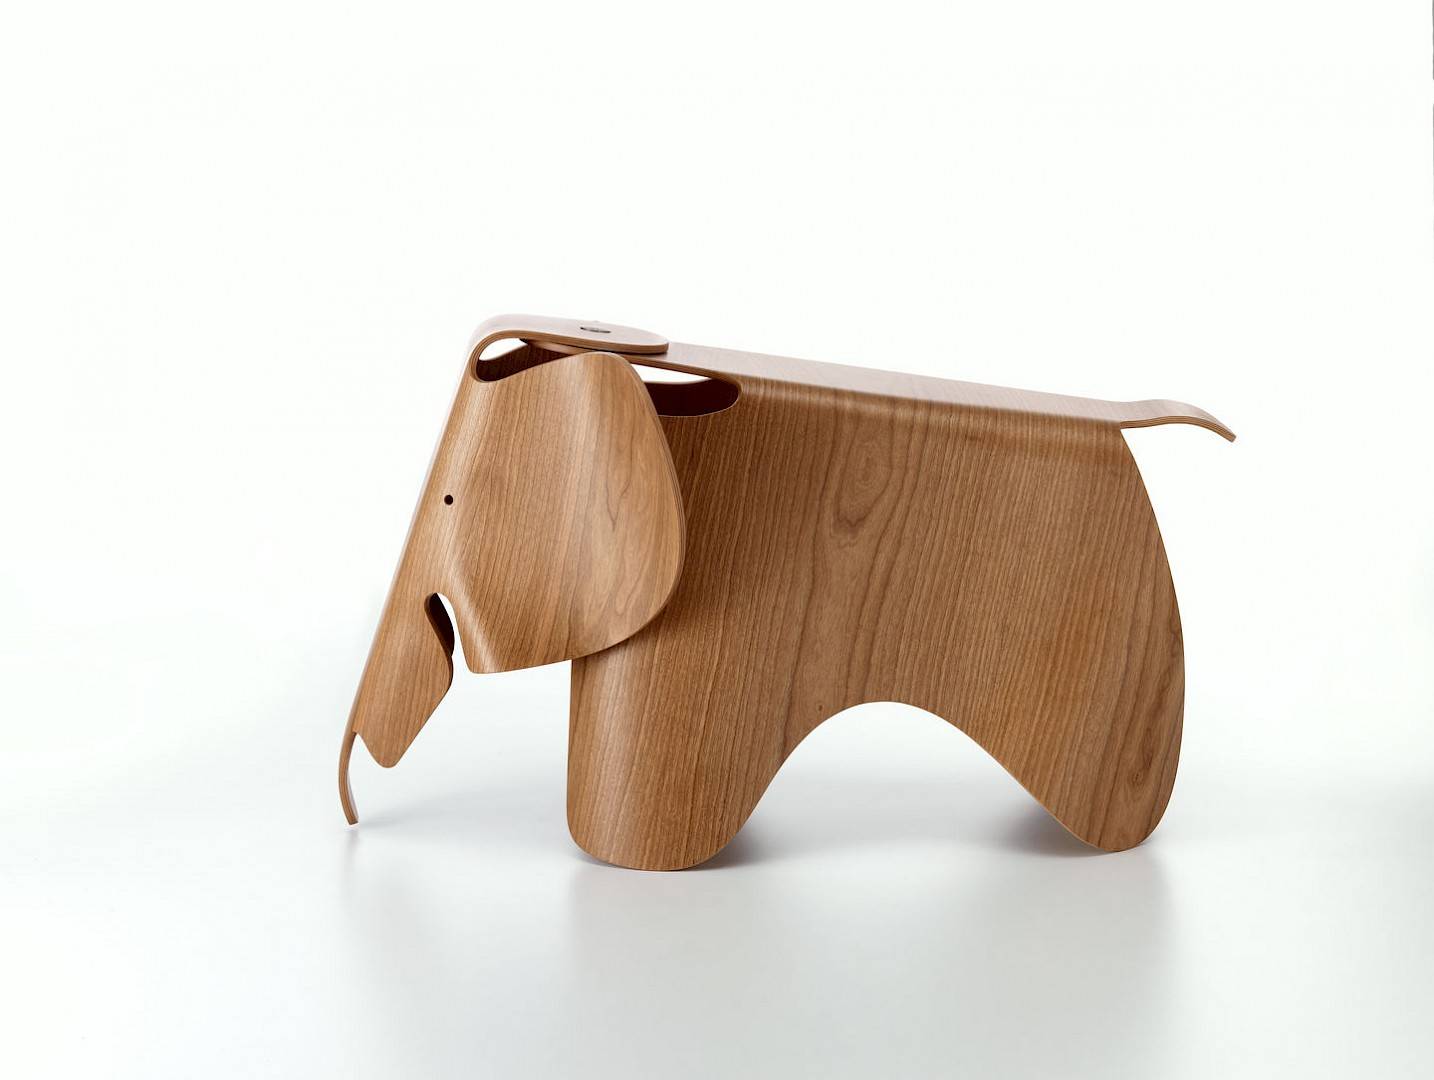 eames_elephant_by_charles_ray_eames-_eames_elephant_plywood_by_charles_ray_eames-elephant plywood-american_c